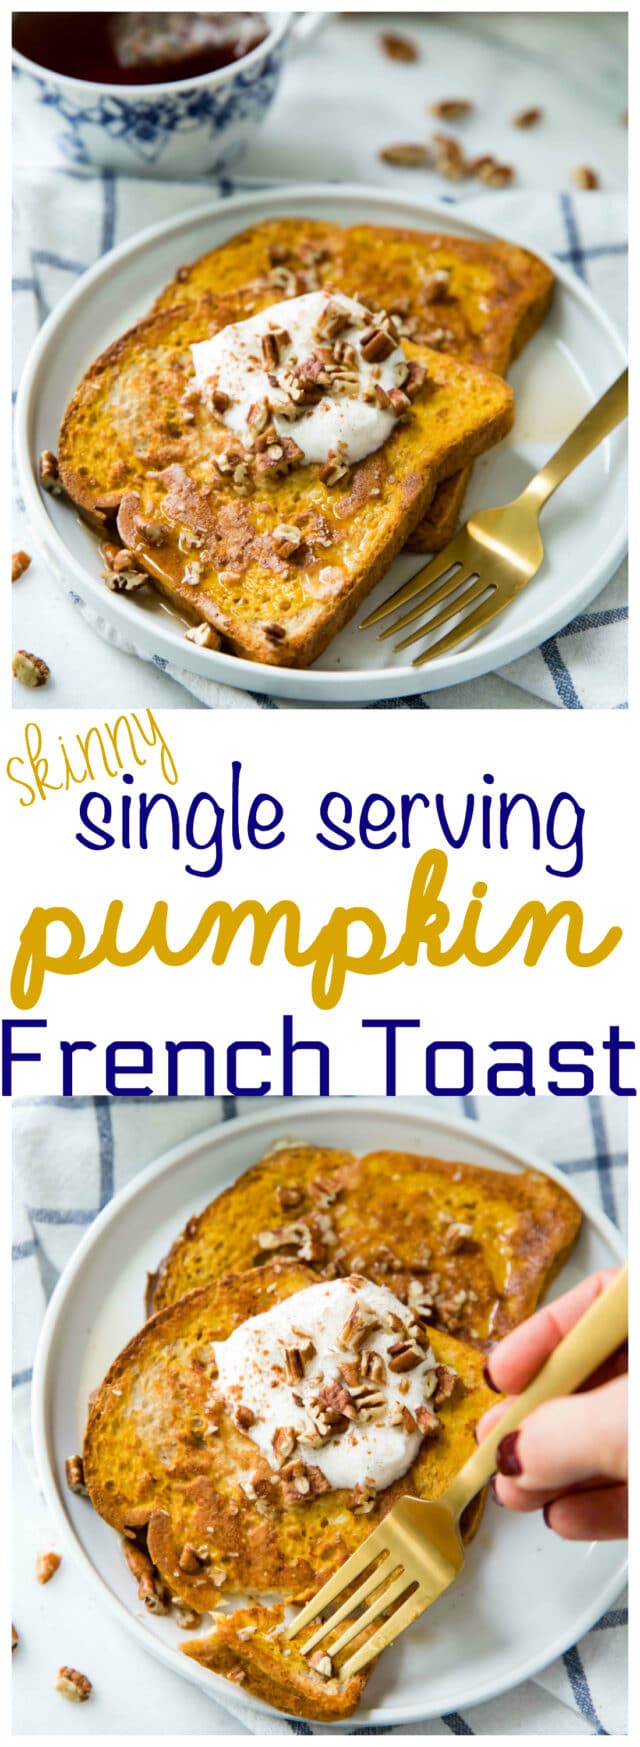 Skinny Single Serving Pumpkin French Toast - easy, yummy and cozy. The perfect fall morning meal and comfort food heaven at its finest!